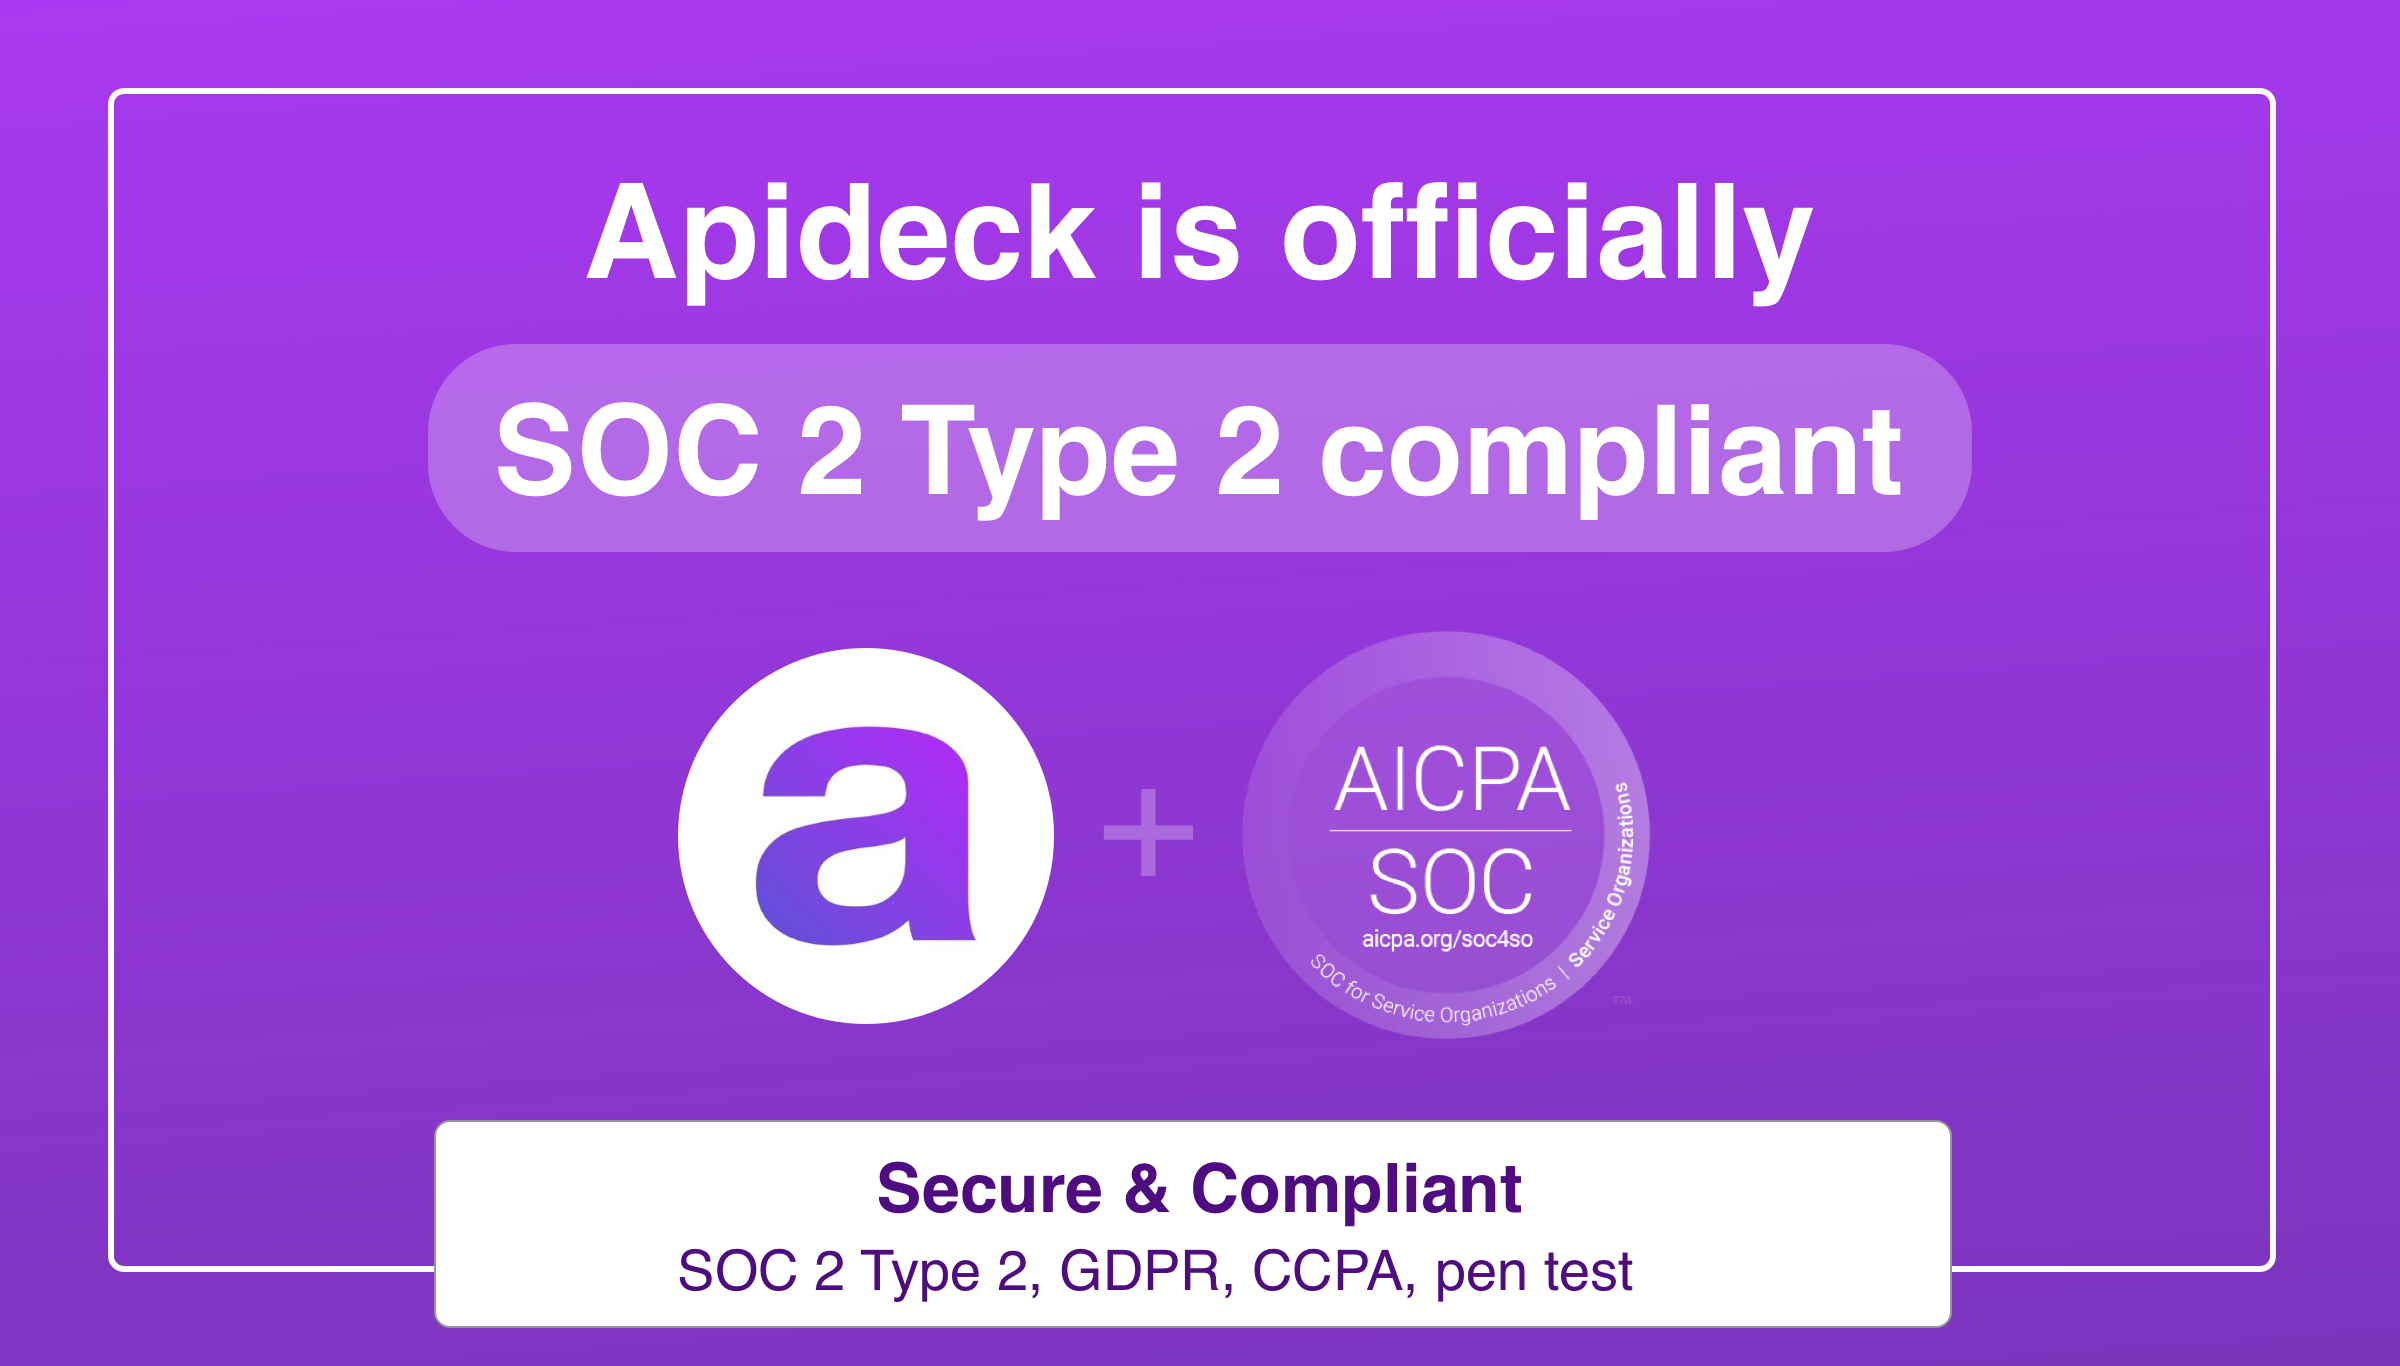 Apideck is now SOC 2 Type 2 compliant